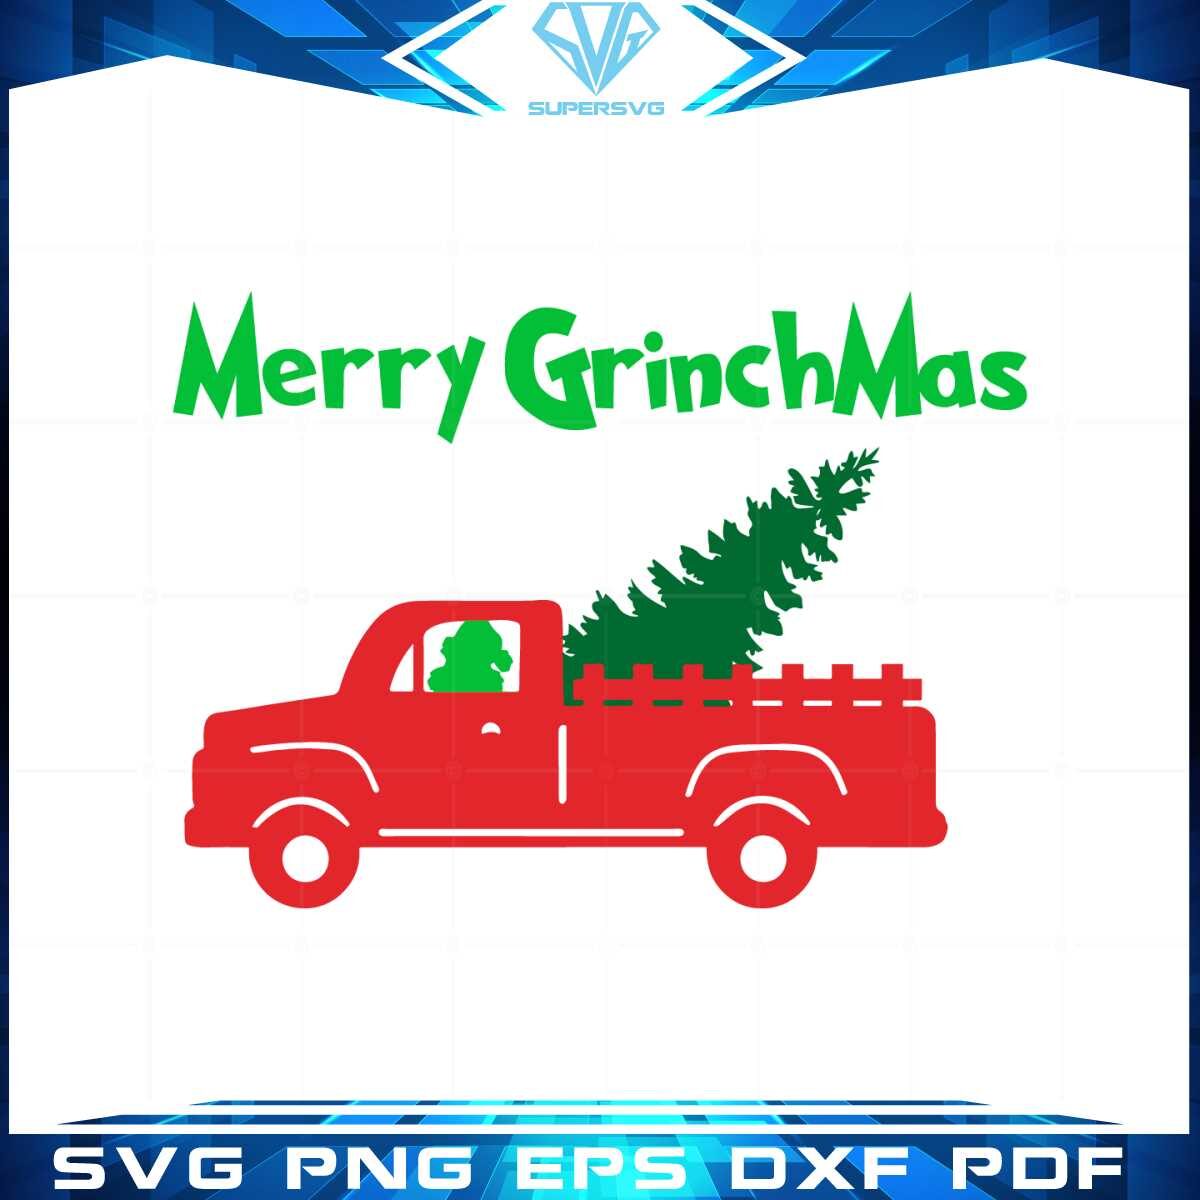 merry-grinchmas-truck-svg-best-graphic-designs-cutting-files